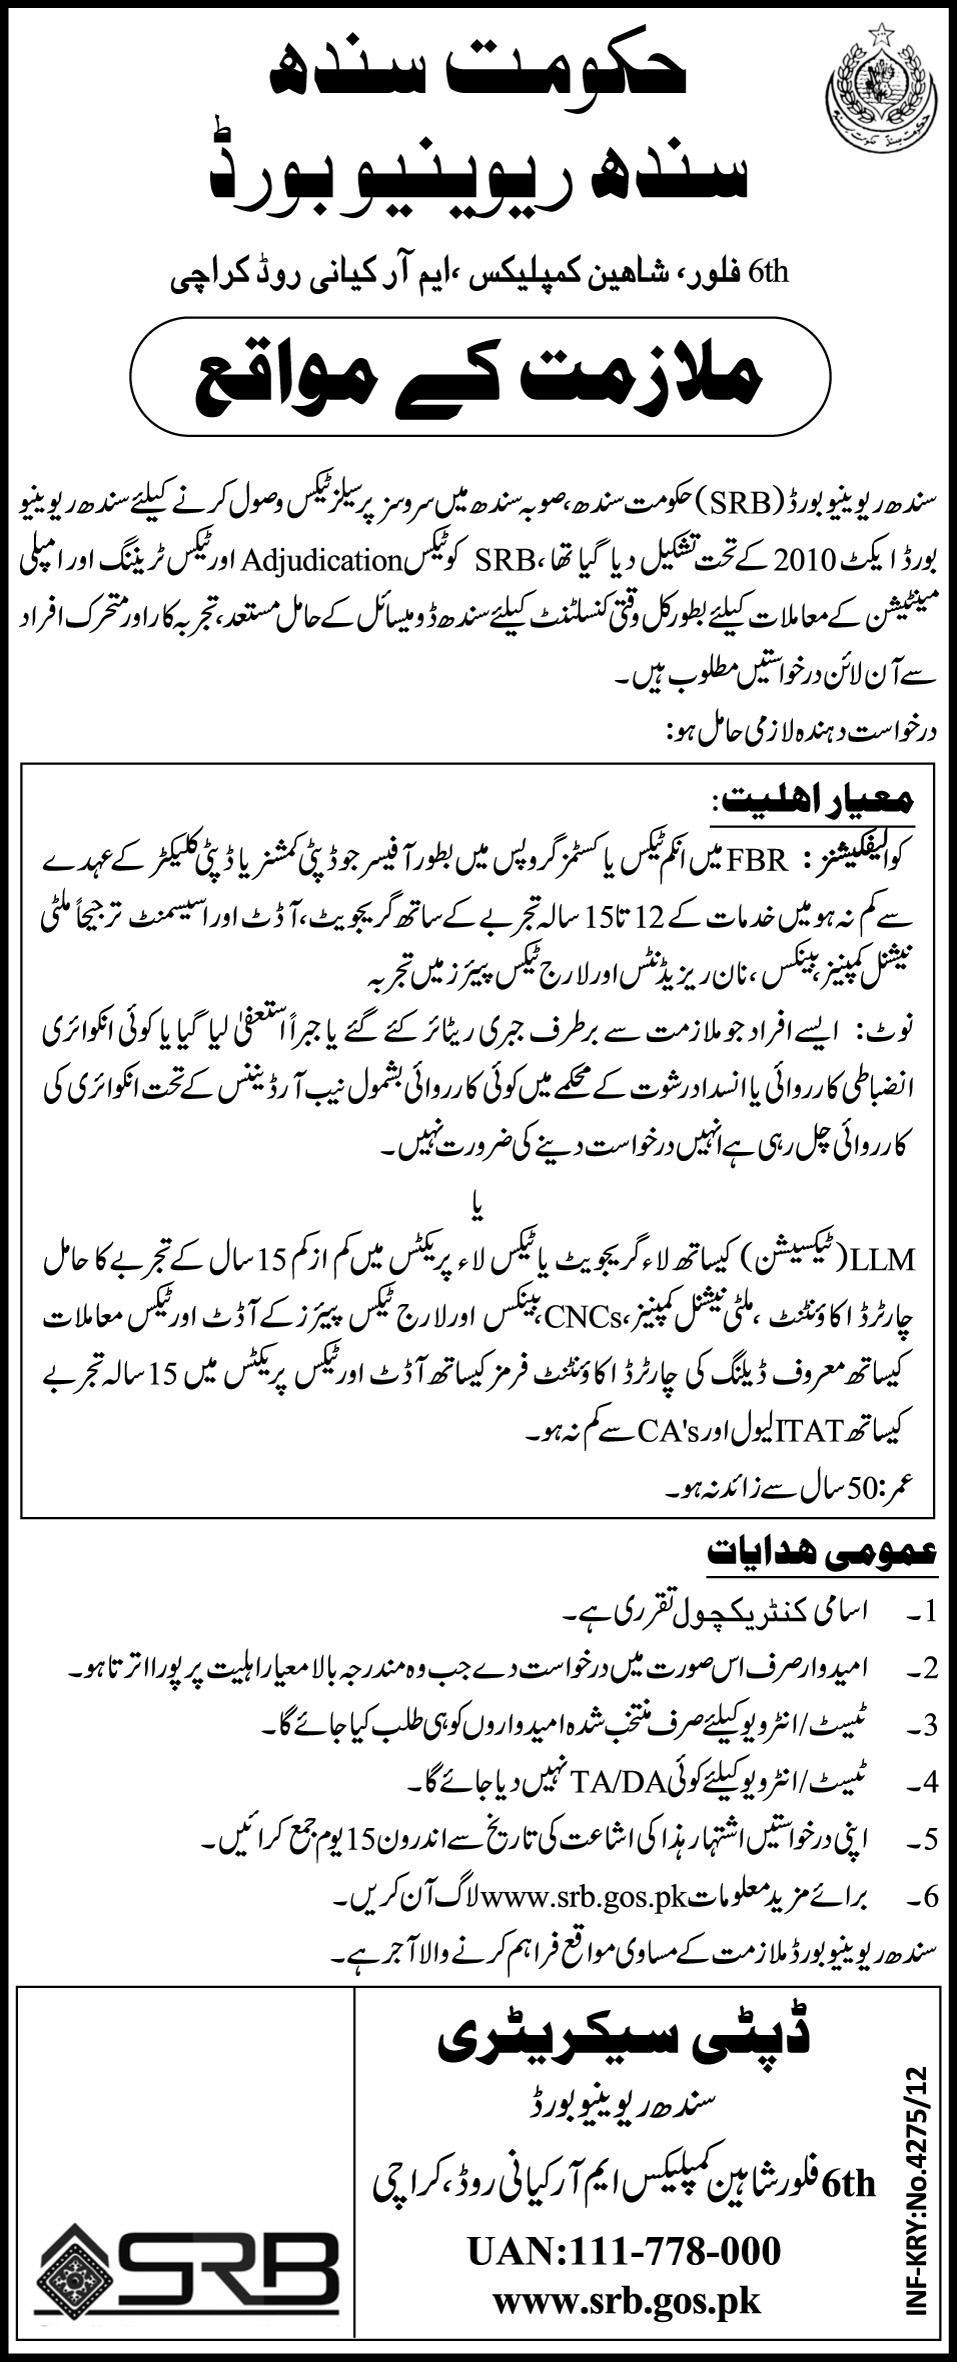 Sindh Revenue Board Job for Taxation Consultant - Daily Express